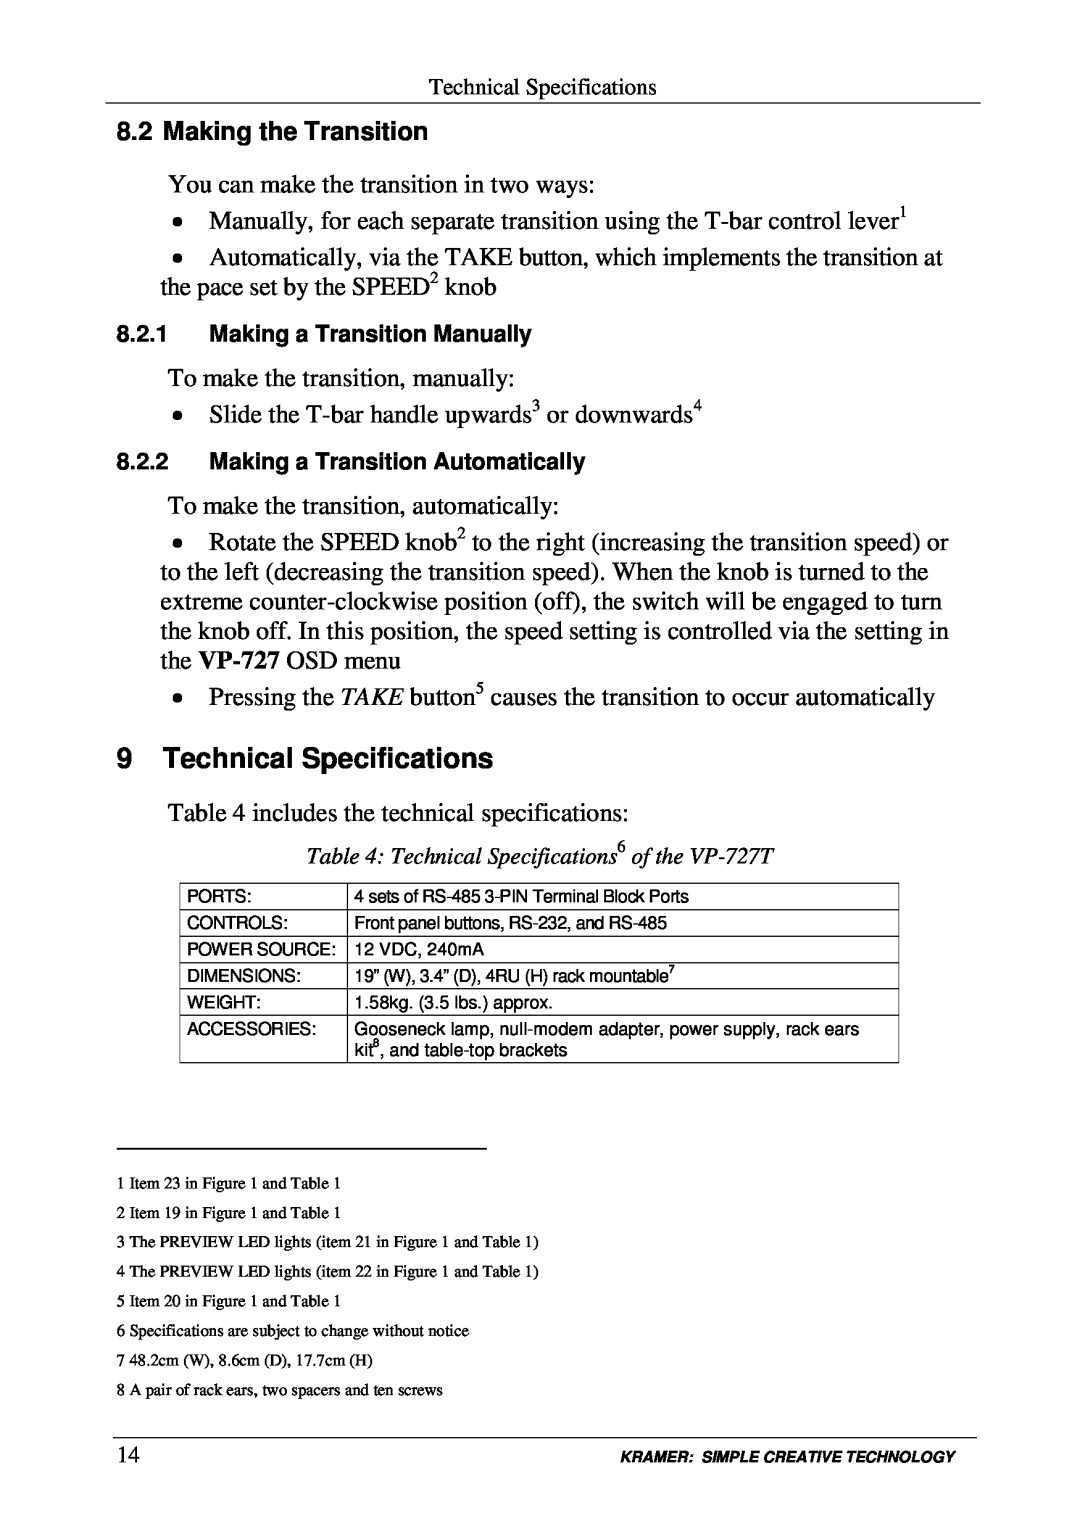 Kramer Electronics VP-727T user manual Technical Specifications, Making the Transition 